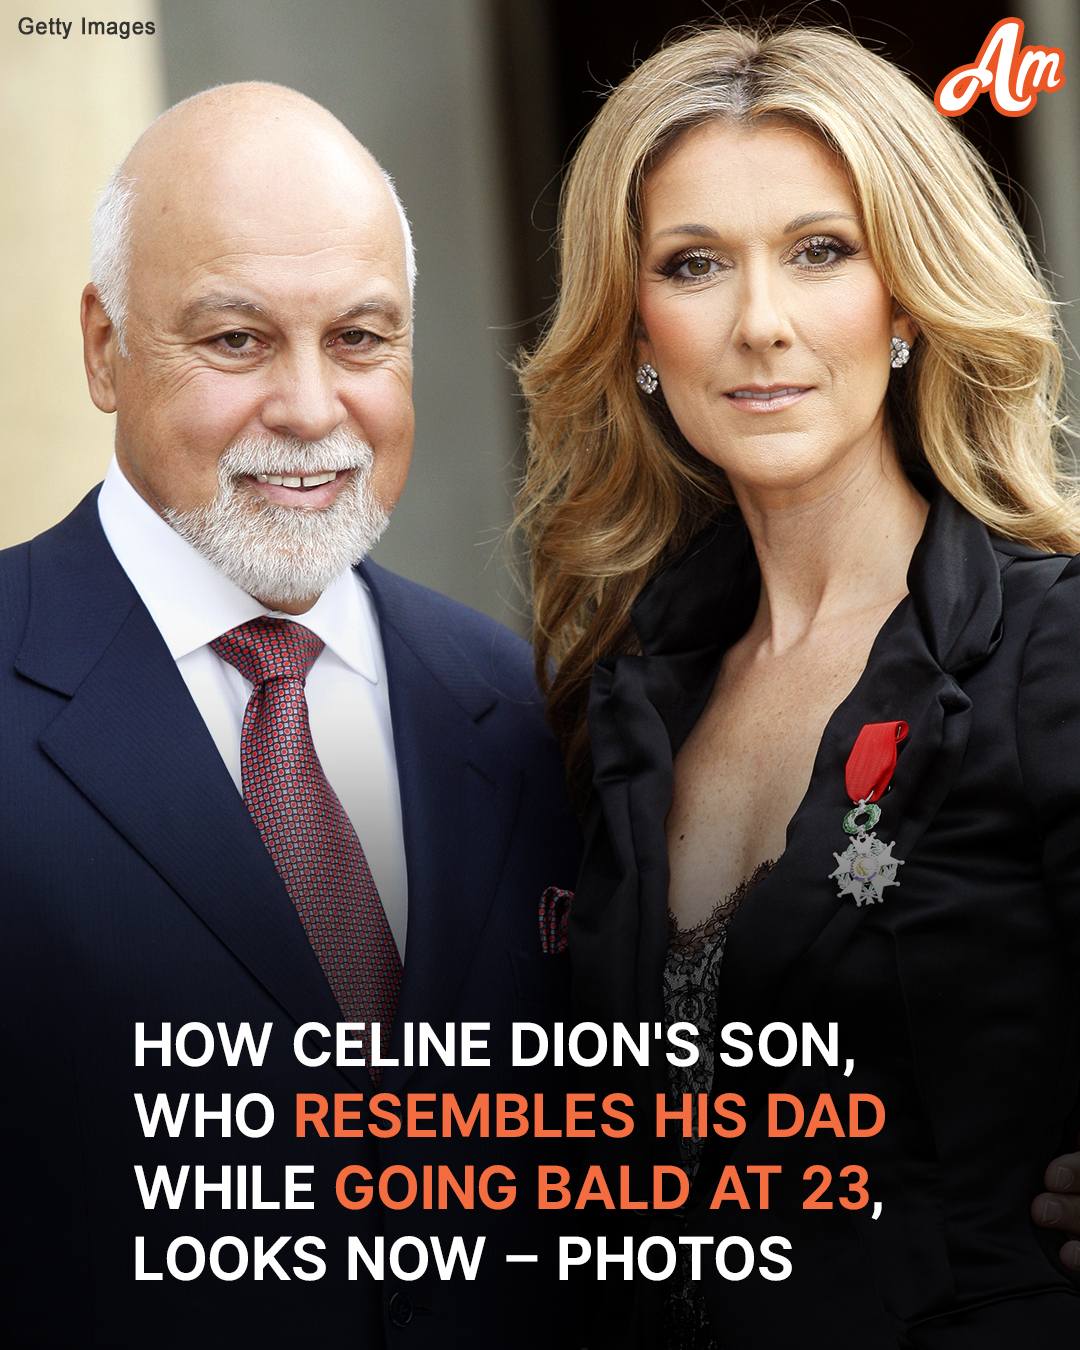 Celine Dion’s handsome eldest son shocked users with his appearance at 23. His jaw-dropping photos are in the comments.👇